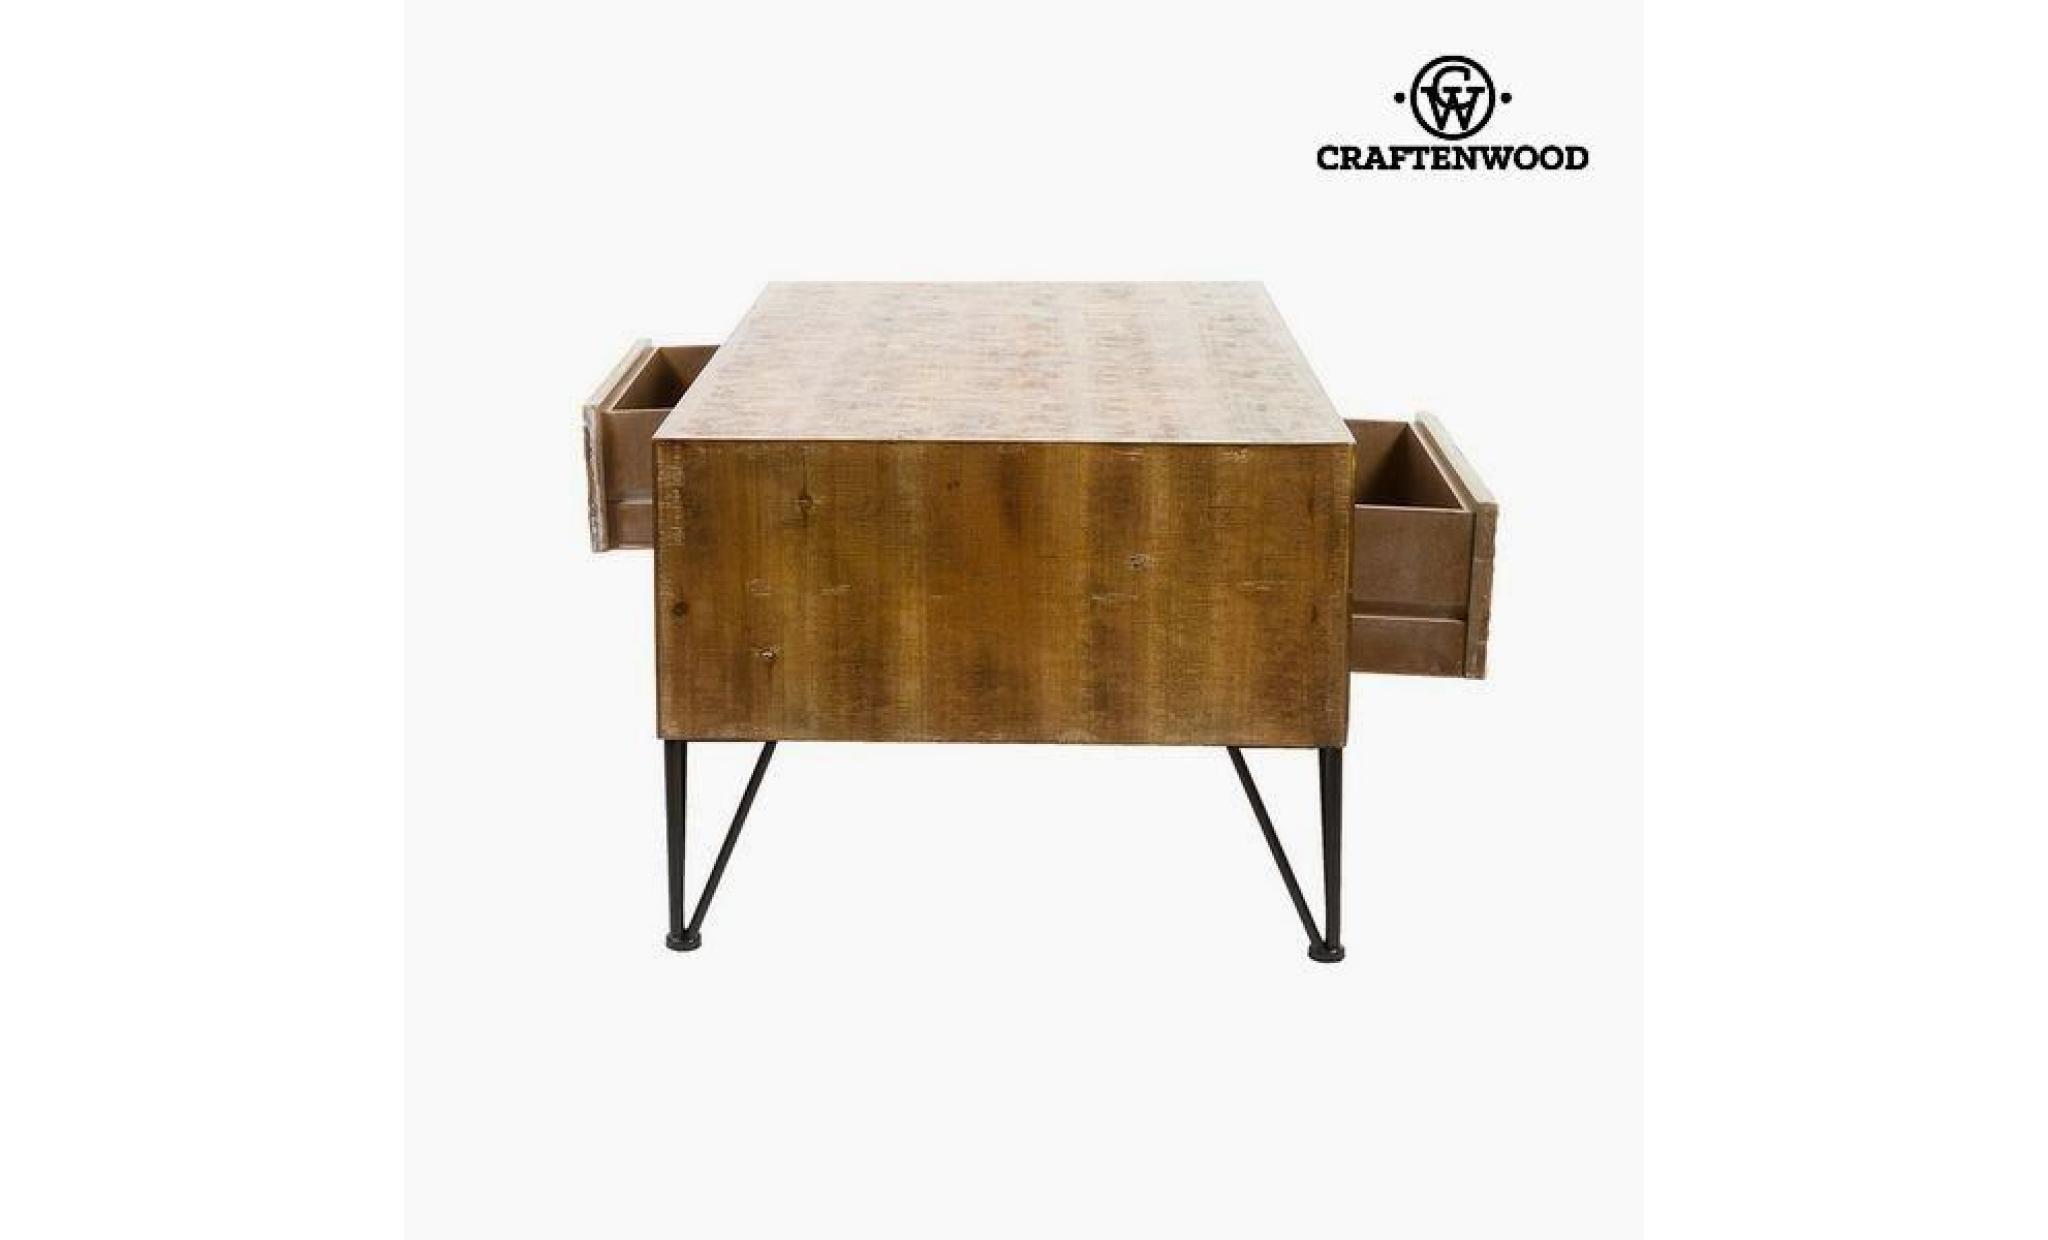 table basse sapin mdf (101 x 60 x 48 cm) by craftenwood pas cher